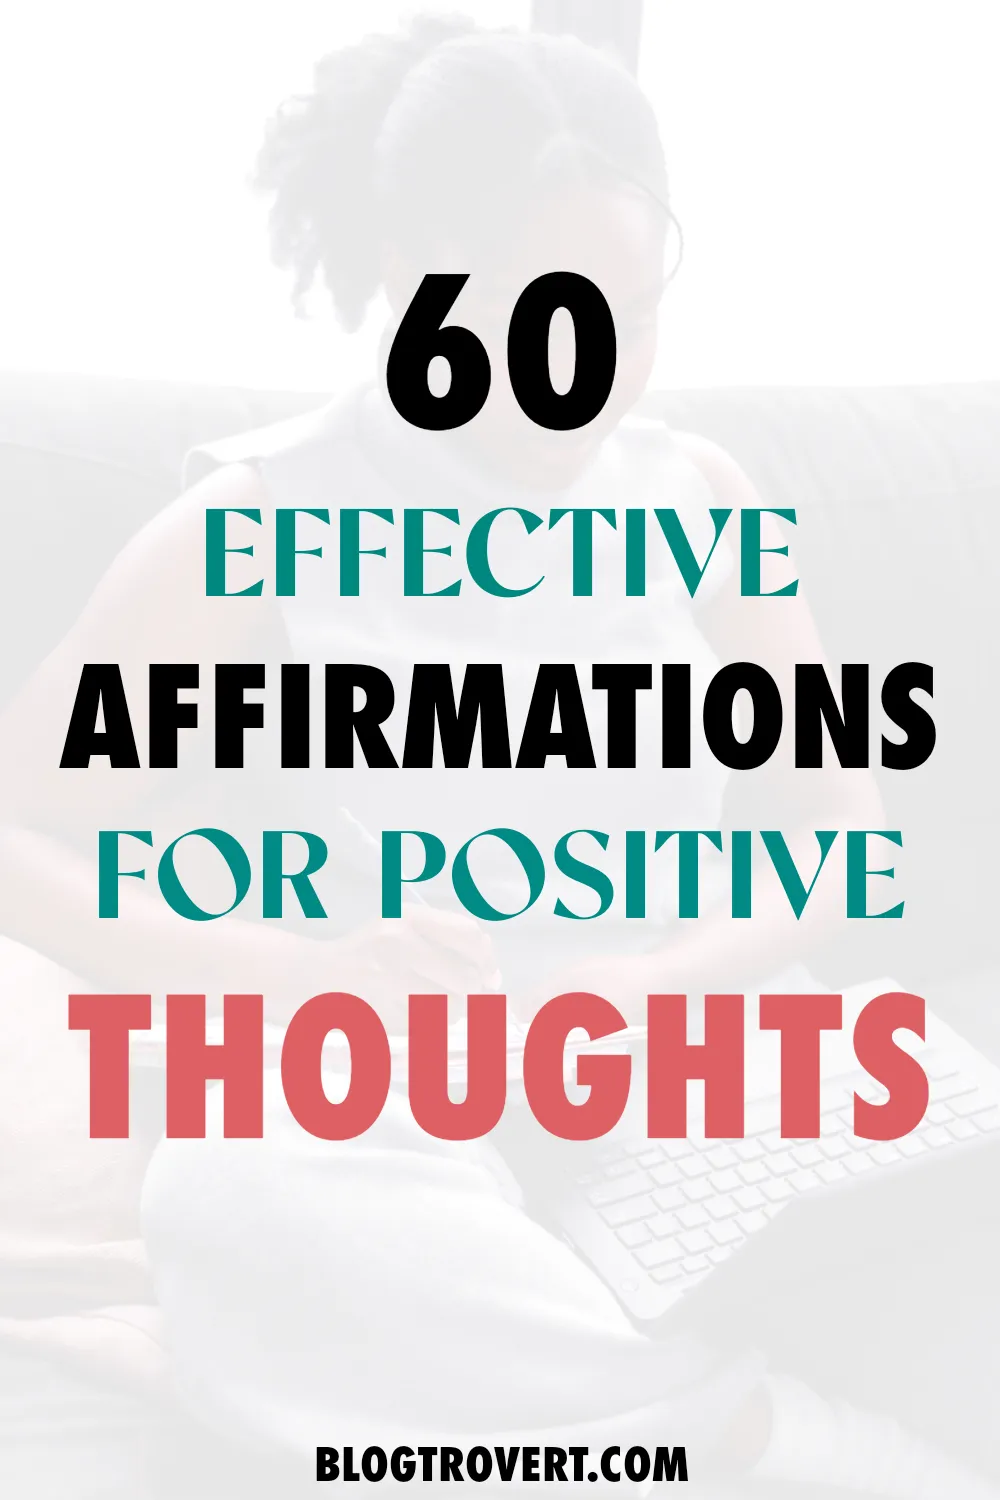 60 Effective Affirmations for Positive Thinking & Emotional Wellbeing 6